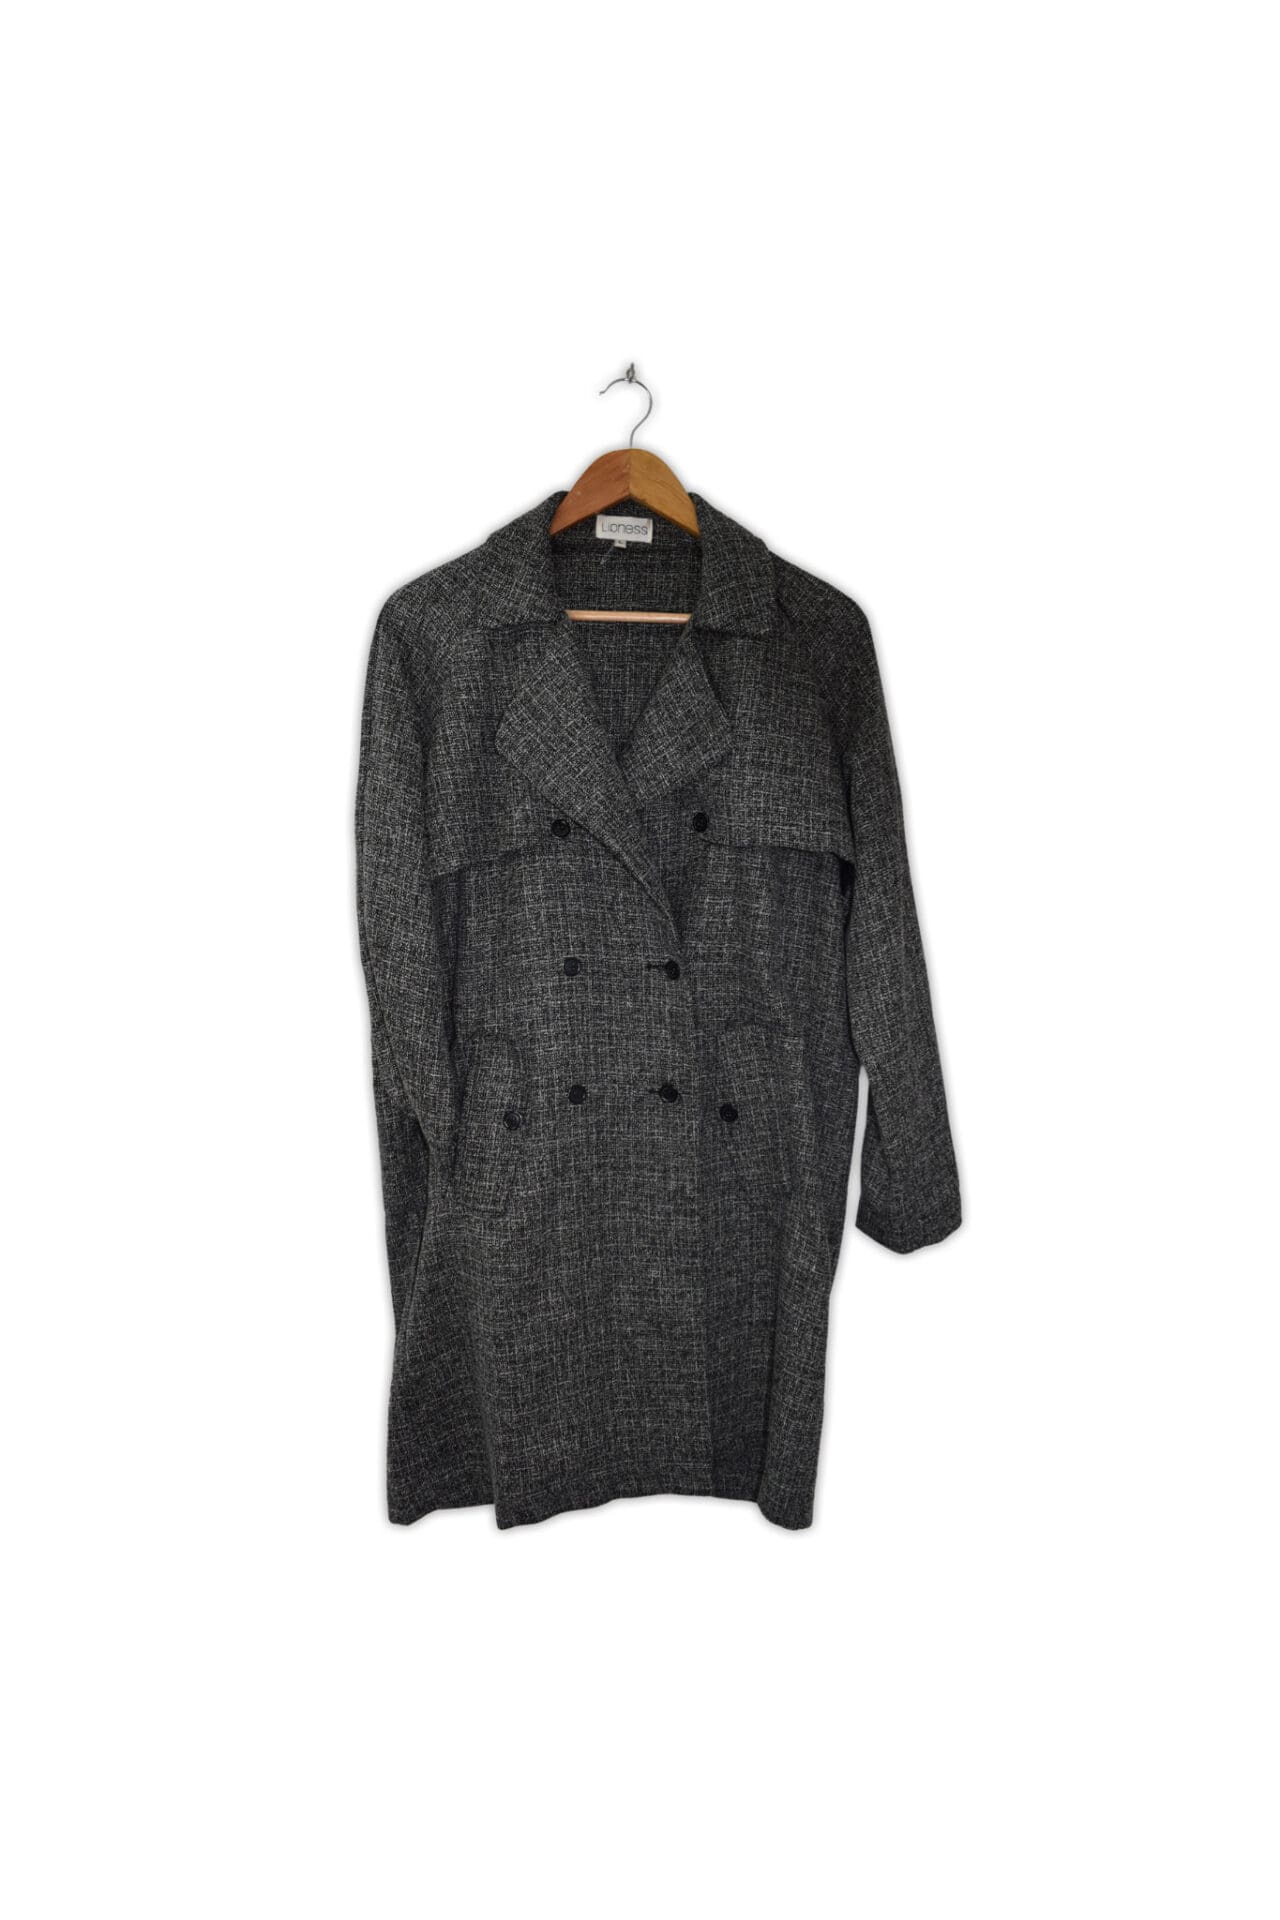 Double-breasted knit coat. Large, medium. Thigh length.